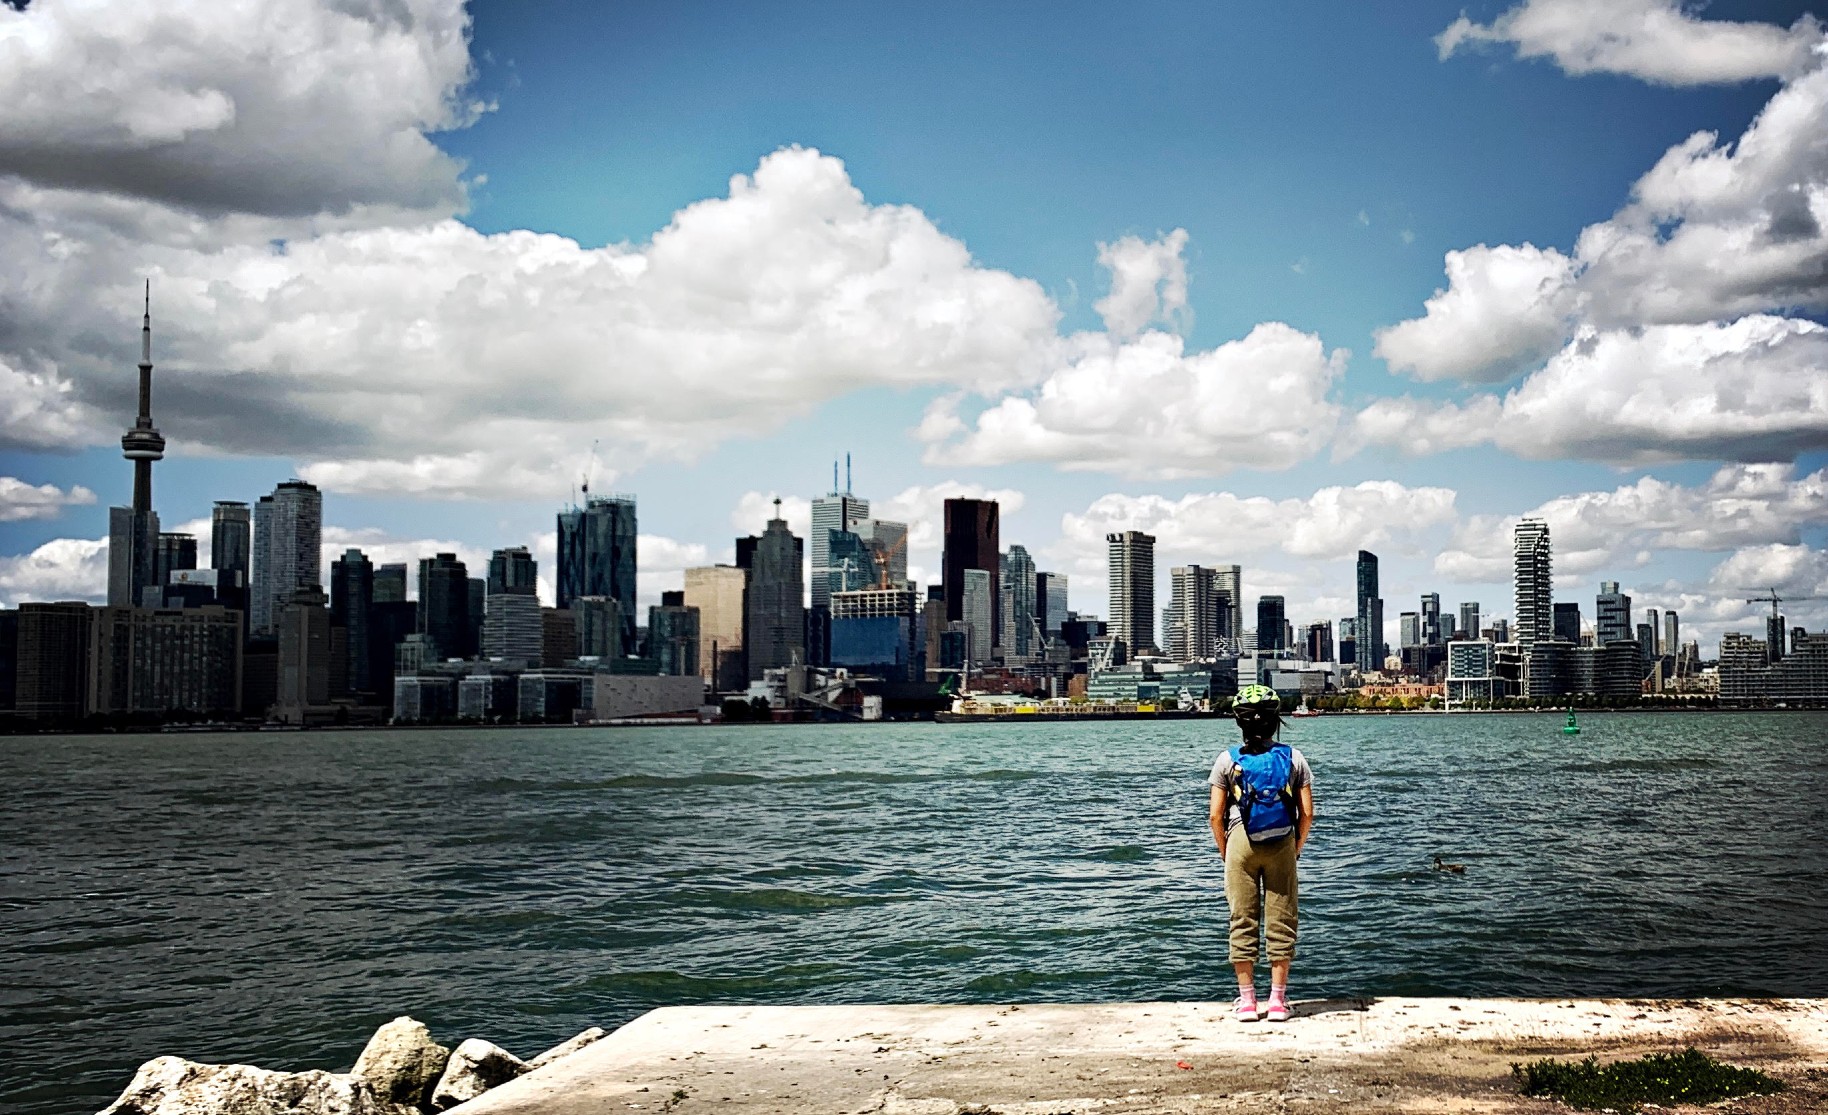 A child stands at the edge of a concrete slab looking across a small body of water towards a Toronto skyline full of many tall buildings